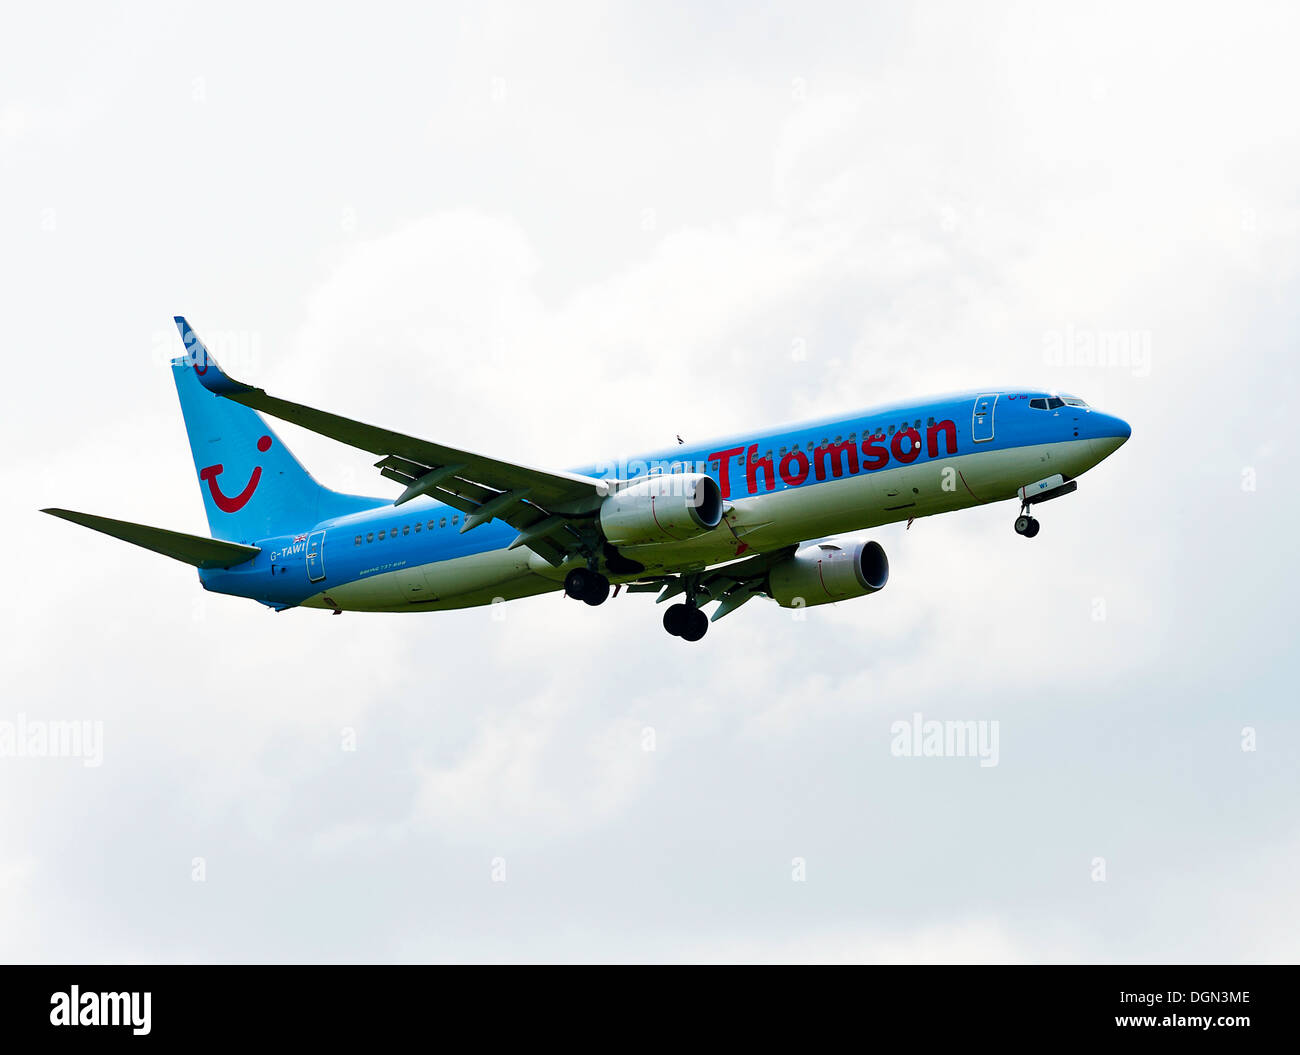 Thomson Airways Boeing 737 Airliner on Approach for Landing at London Gatwick Airport West Sussex England United Kingdom UK Stock Photo